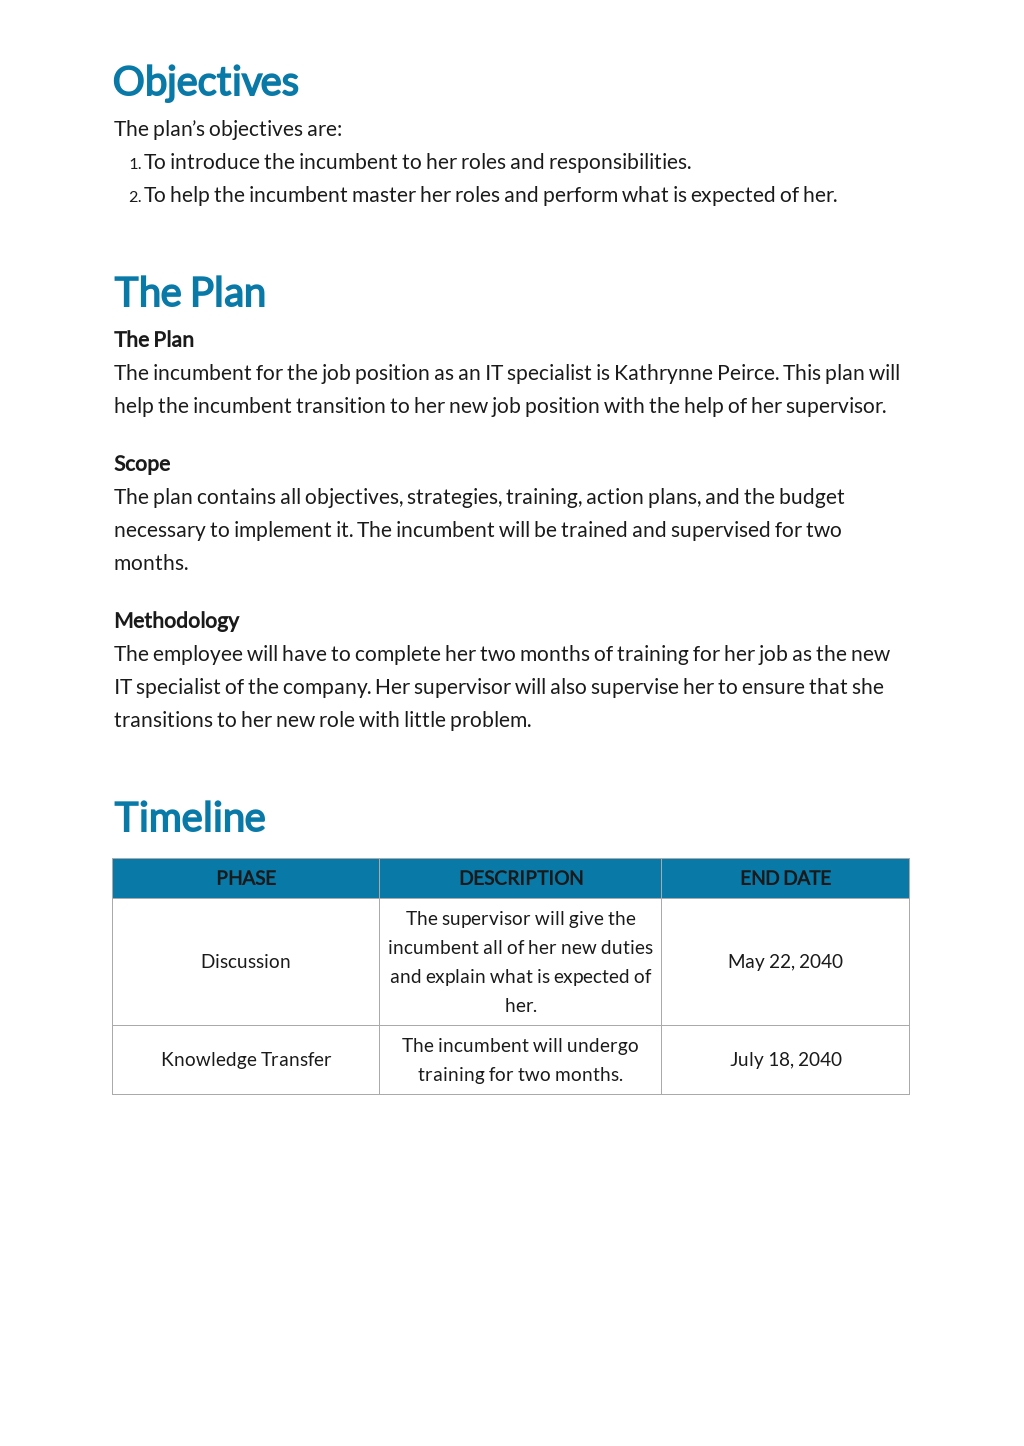 Role Transition Plan Template 1.jpe